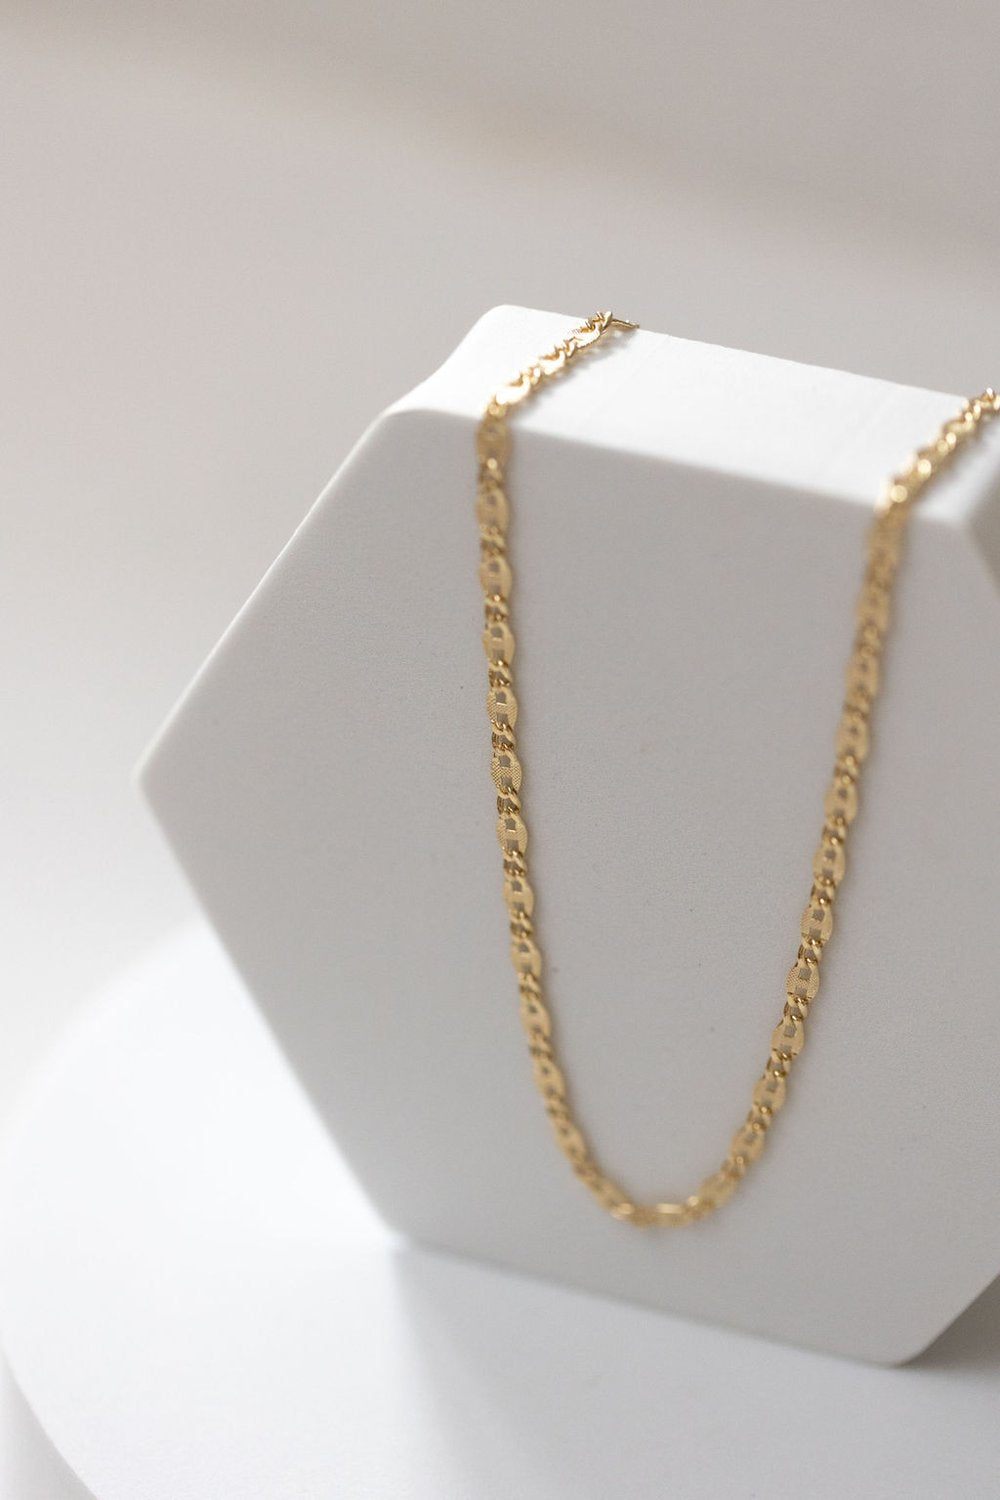 Lily & Elm - Gold Filled “Victoria” Mariner Necklace